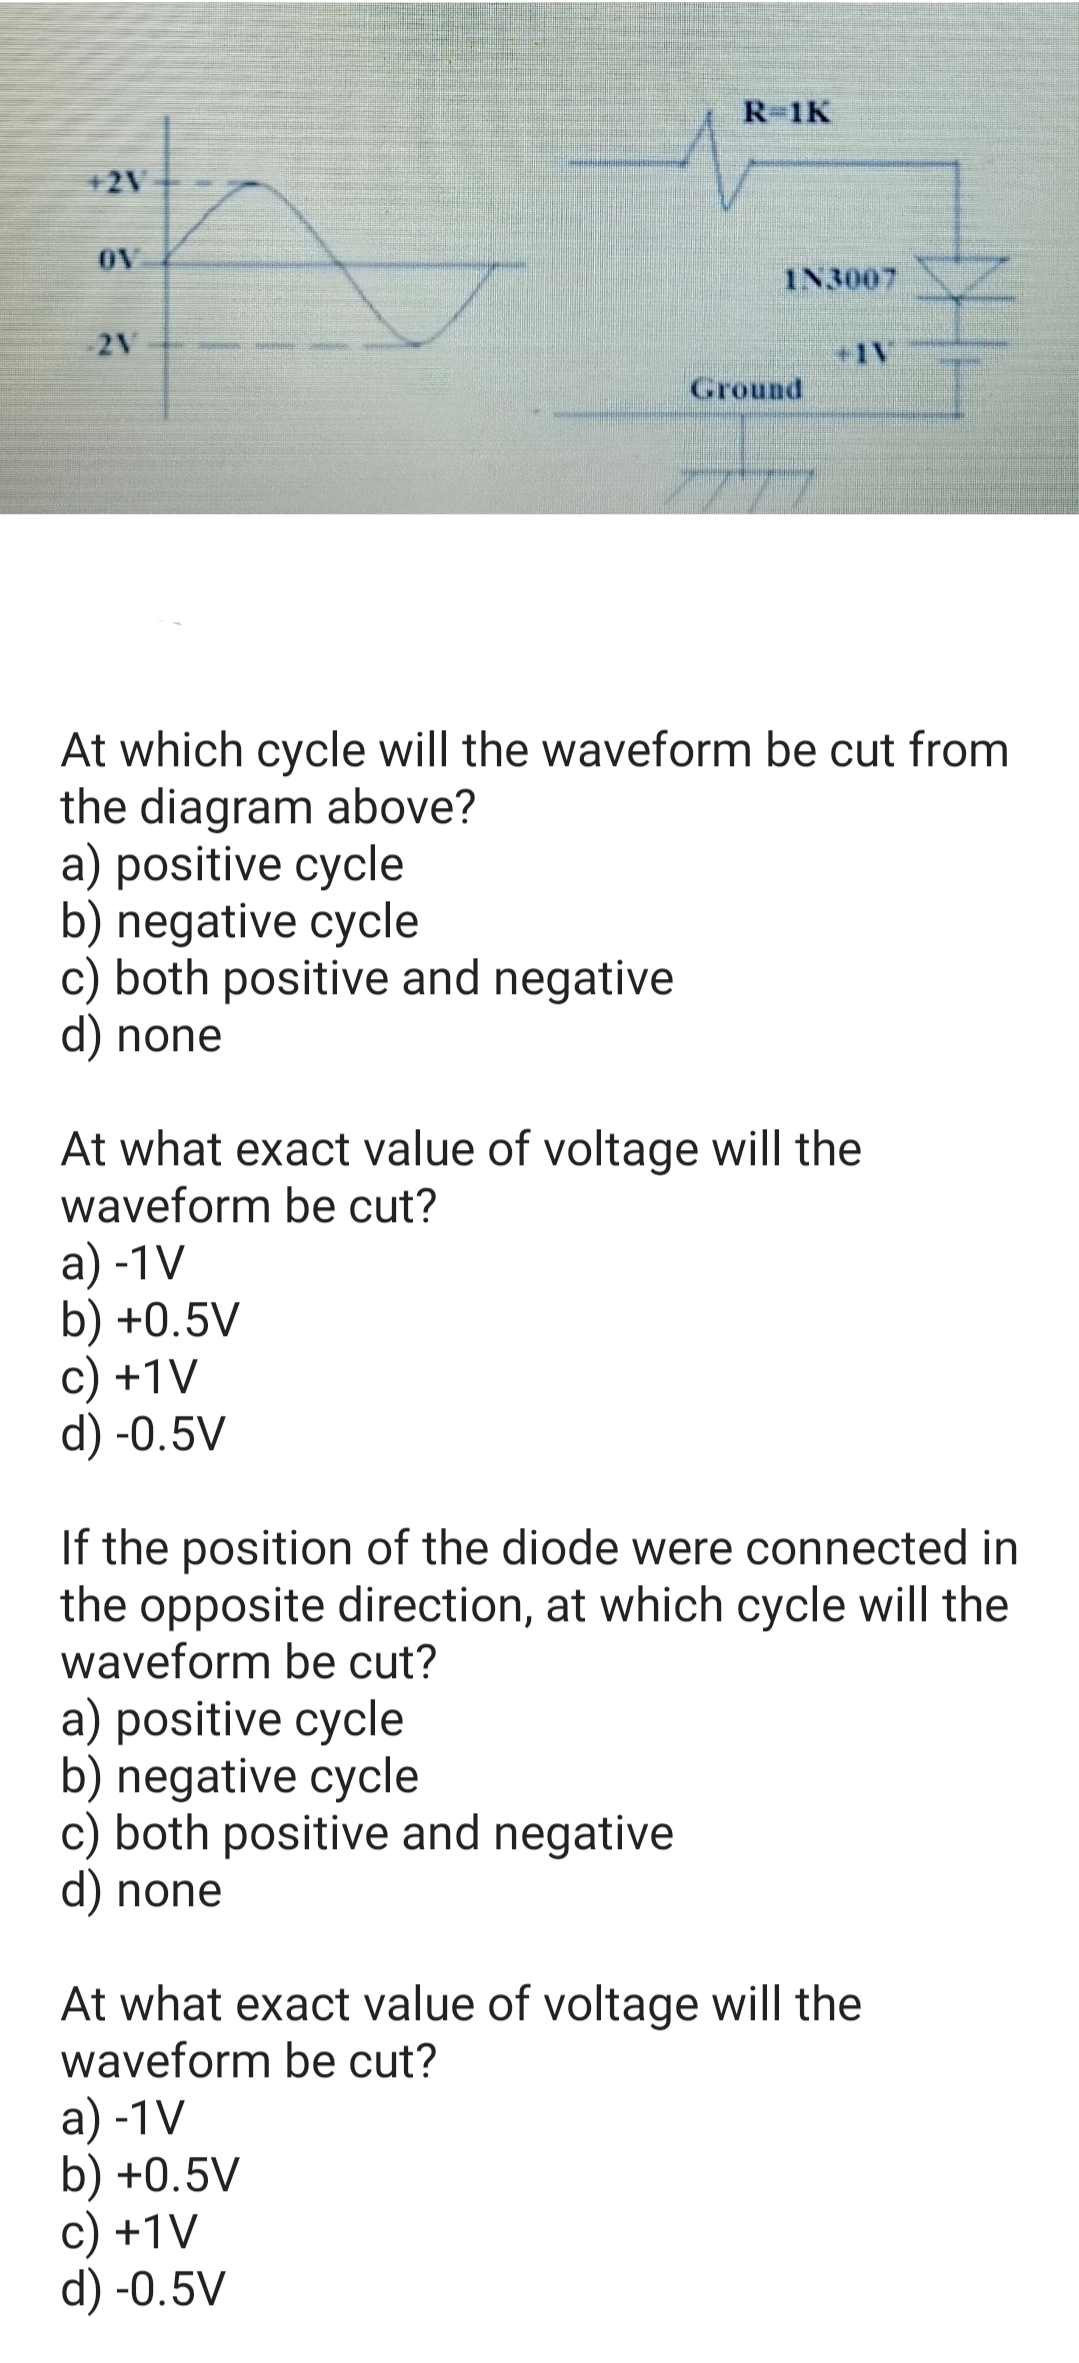 R-1K
+2V
OV
IN3007
2V
+1V
Ground
At which cycle will the waveform be cut from
the diagram above?
a) positive cycle
b) negative cycle
c) both positive and negative
d) none
At what exact value of voltage will the
waveform be cut?
a) -1V
b) +0.5V
c) +1V
d) -0.5V
If the position of the diode were connected in
the opposite direction, at which cycle will the
waveform be cut?
a) positive cycle
b) negative cycle
c) both positive and negative
d) none
At what exact value of voltage will the
waveform be cut?
a) -1V
b) +0.5V
c) +1V
d) -0.5V
